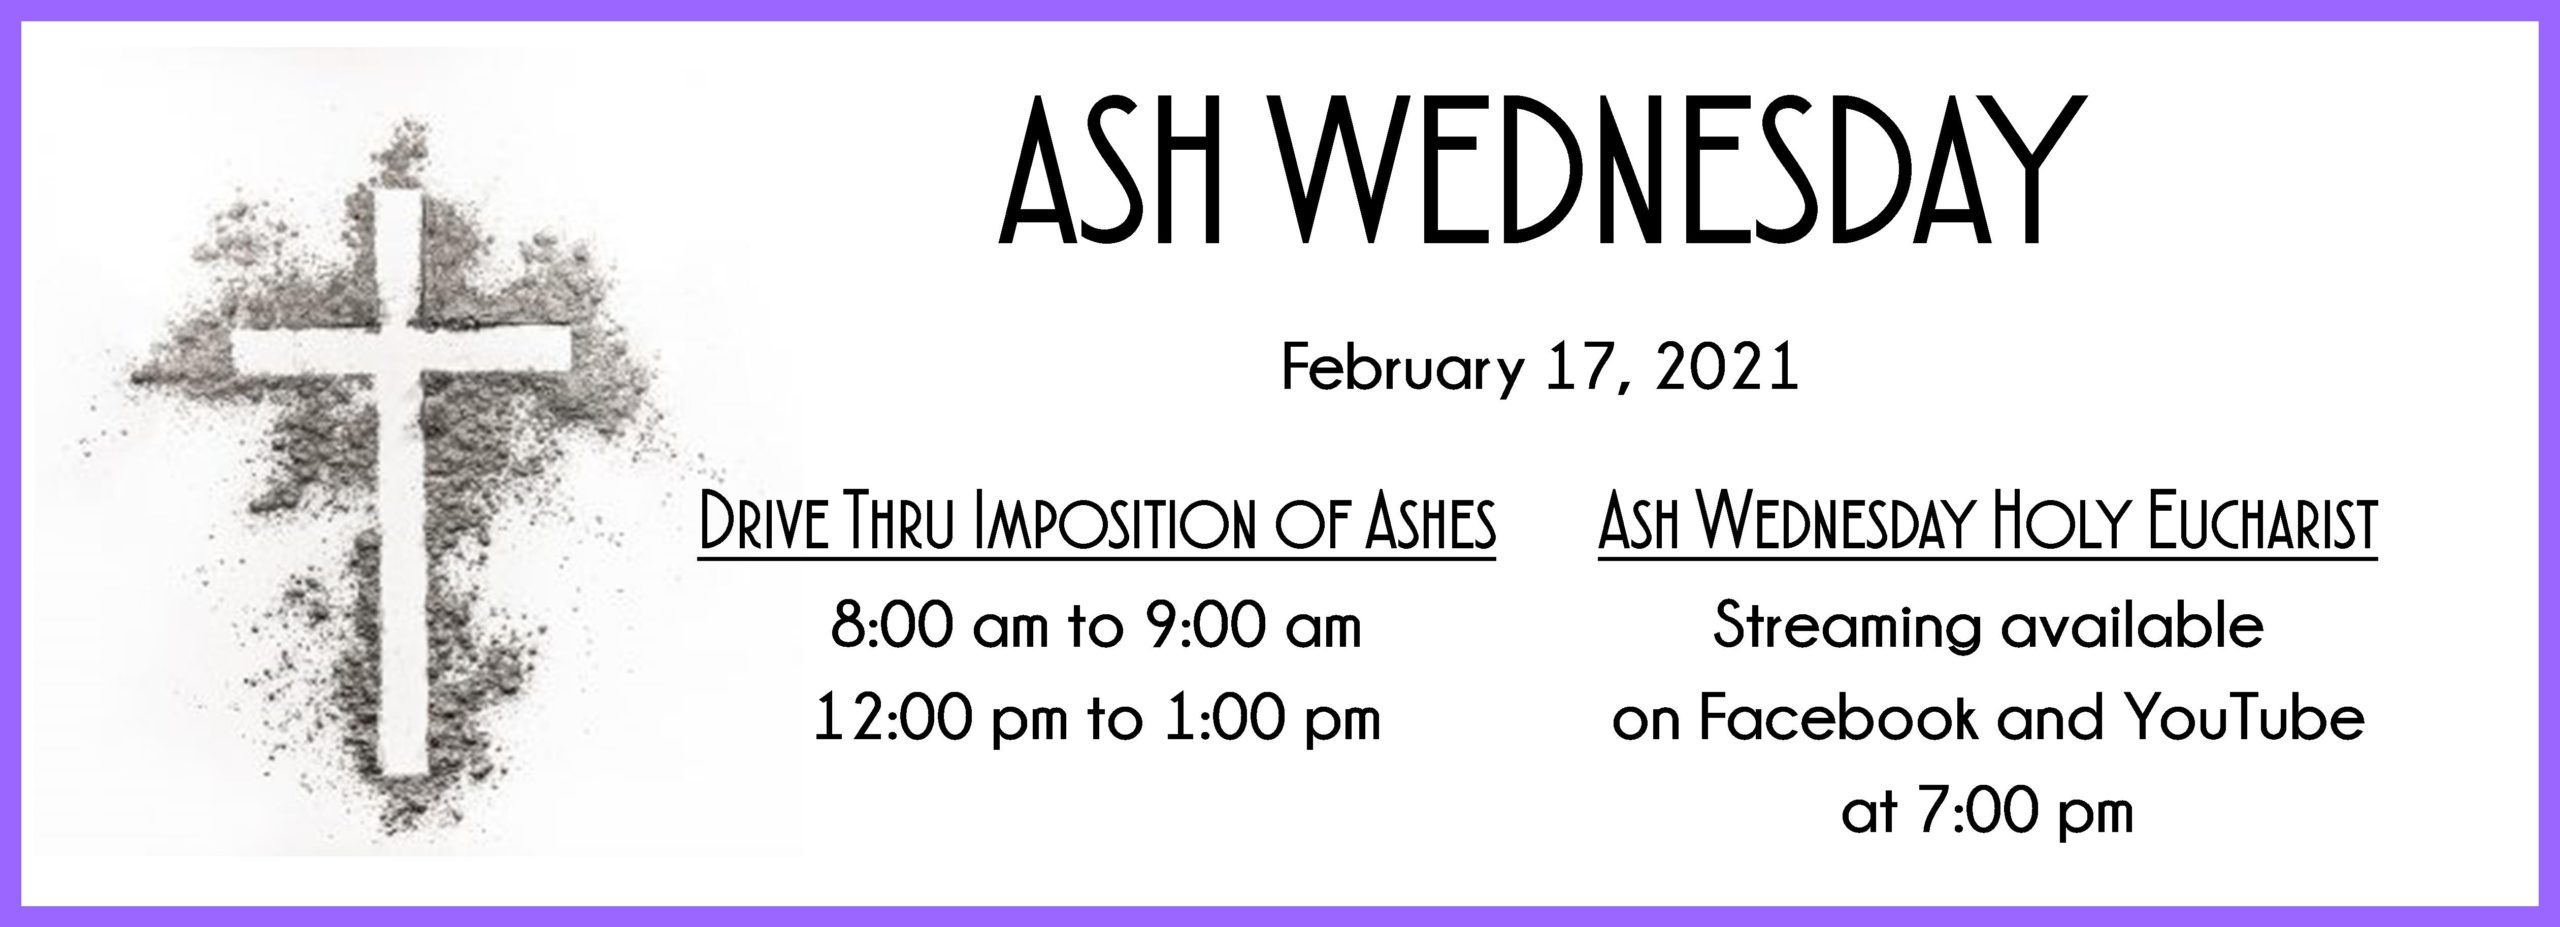 imposition of ashes